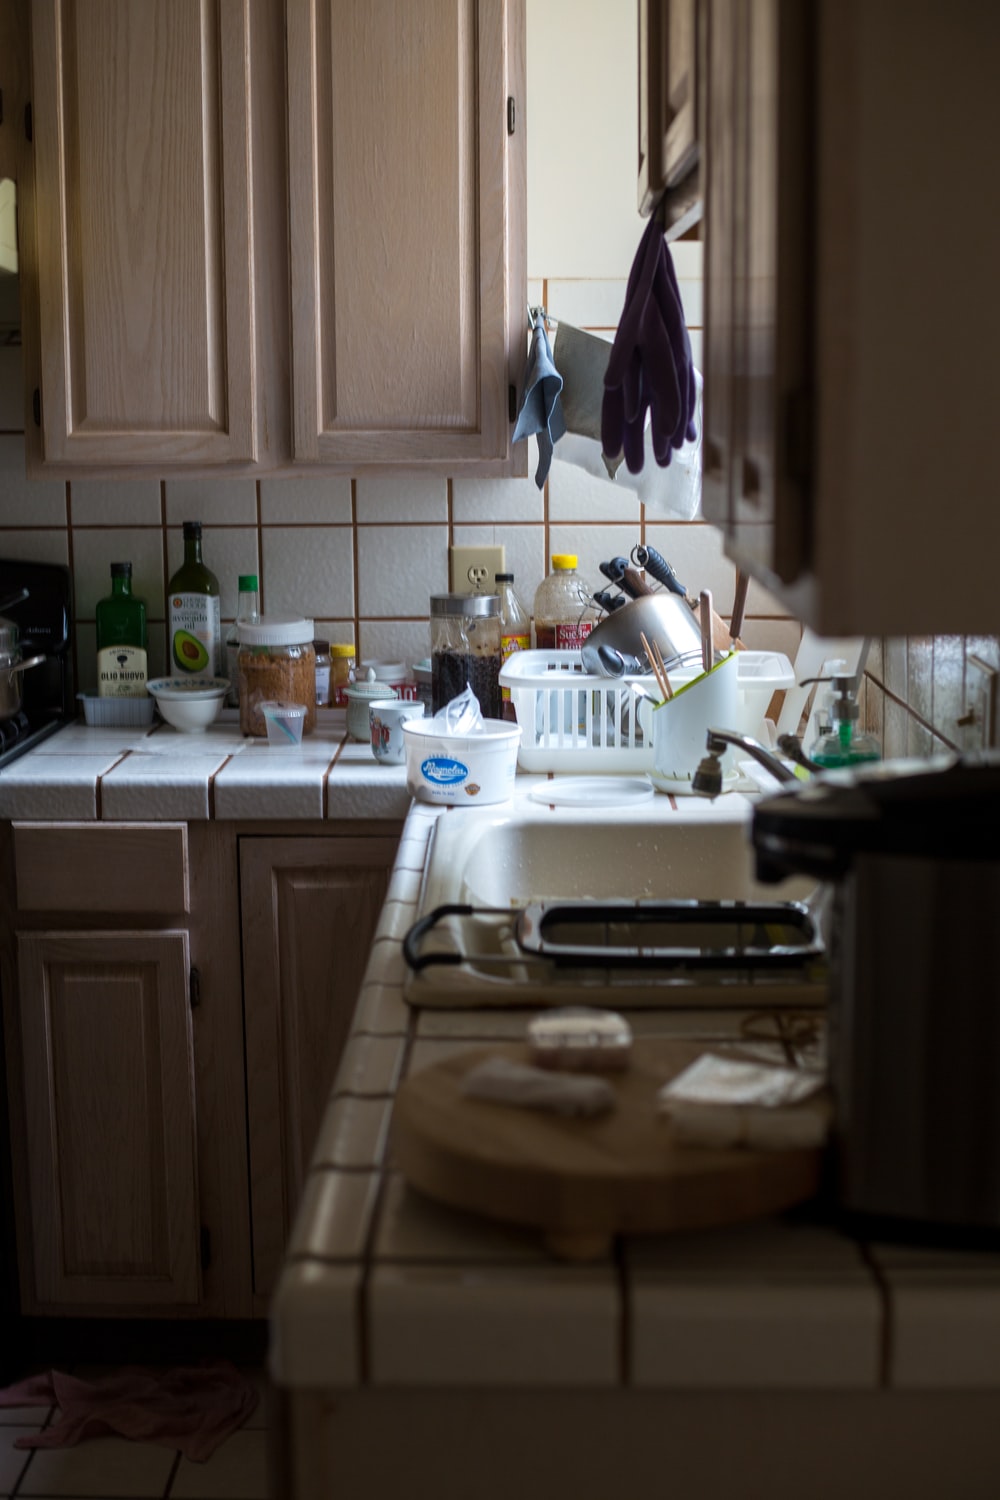 Messy Kitchen Picture. Download Free Image